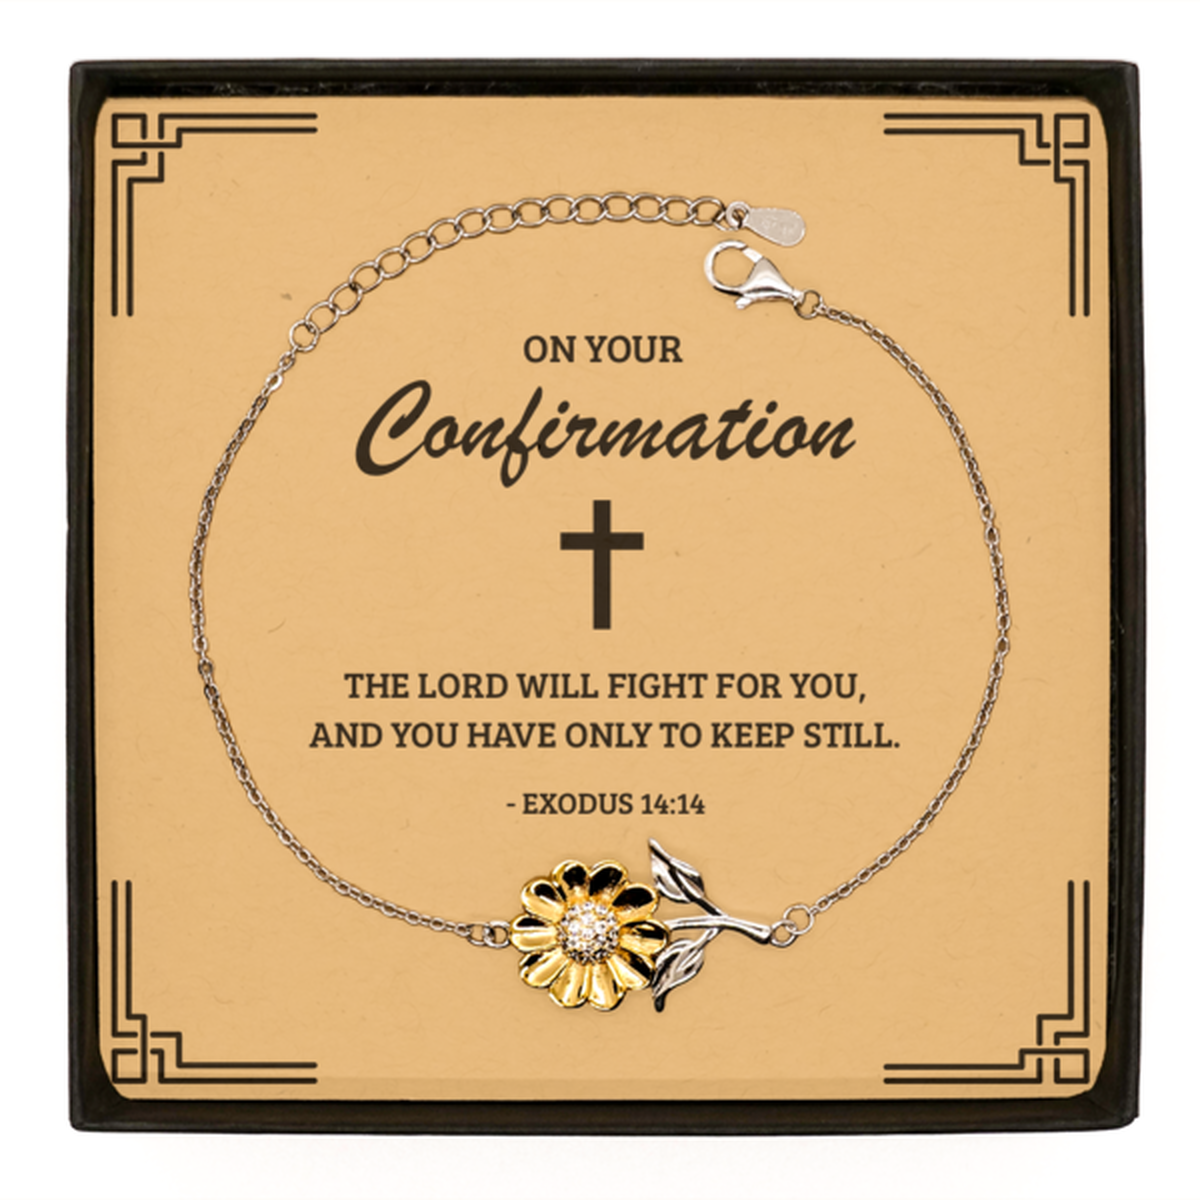 Confirmation Gifts for Teenage Girls, The Lord will fight for you, .925 Sterling Silver Sunflower Bracelet with Bible Verse Message Card, Religious Catholic Bracelet for Daughter, Granddaughter